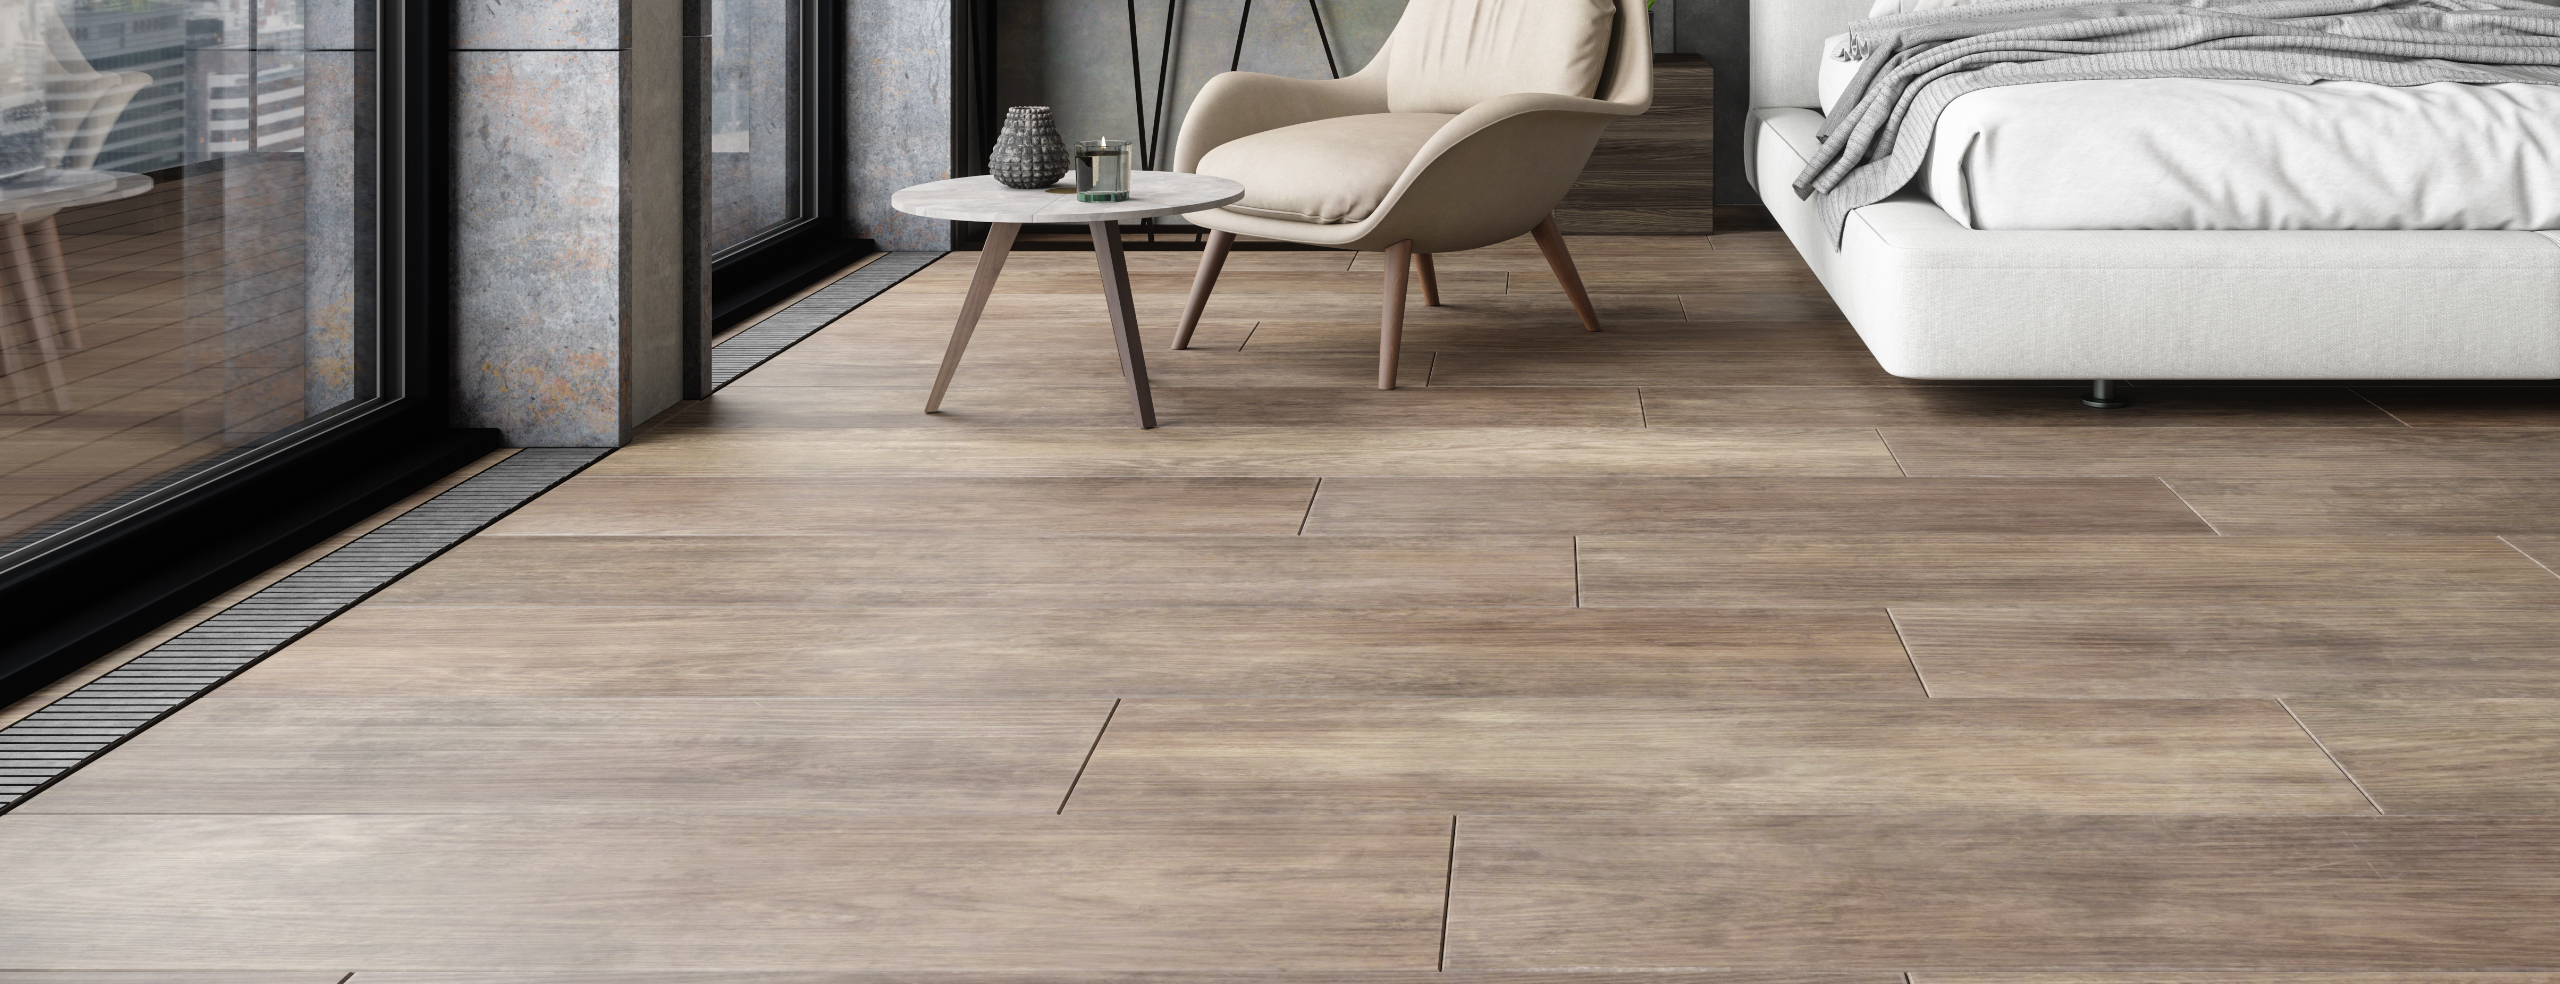 Guide to Fitting Vinyl Flooring - Up to 50% Off